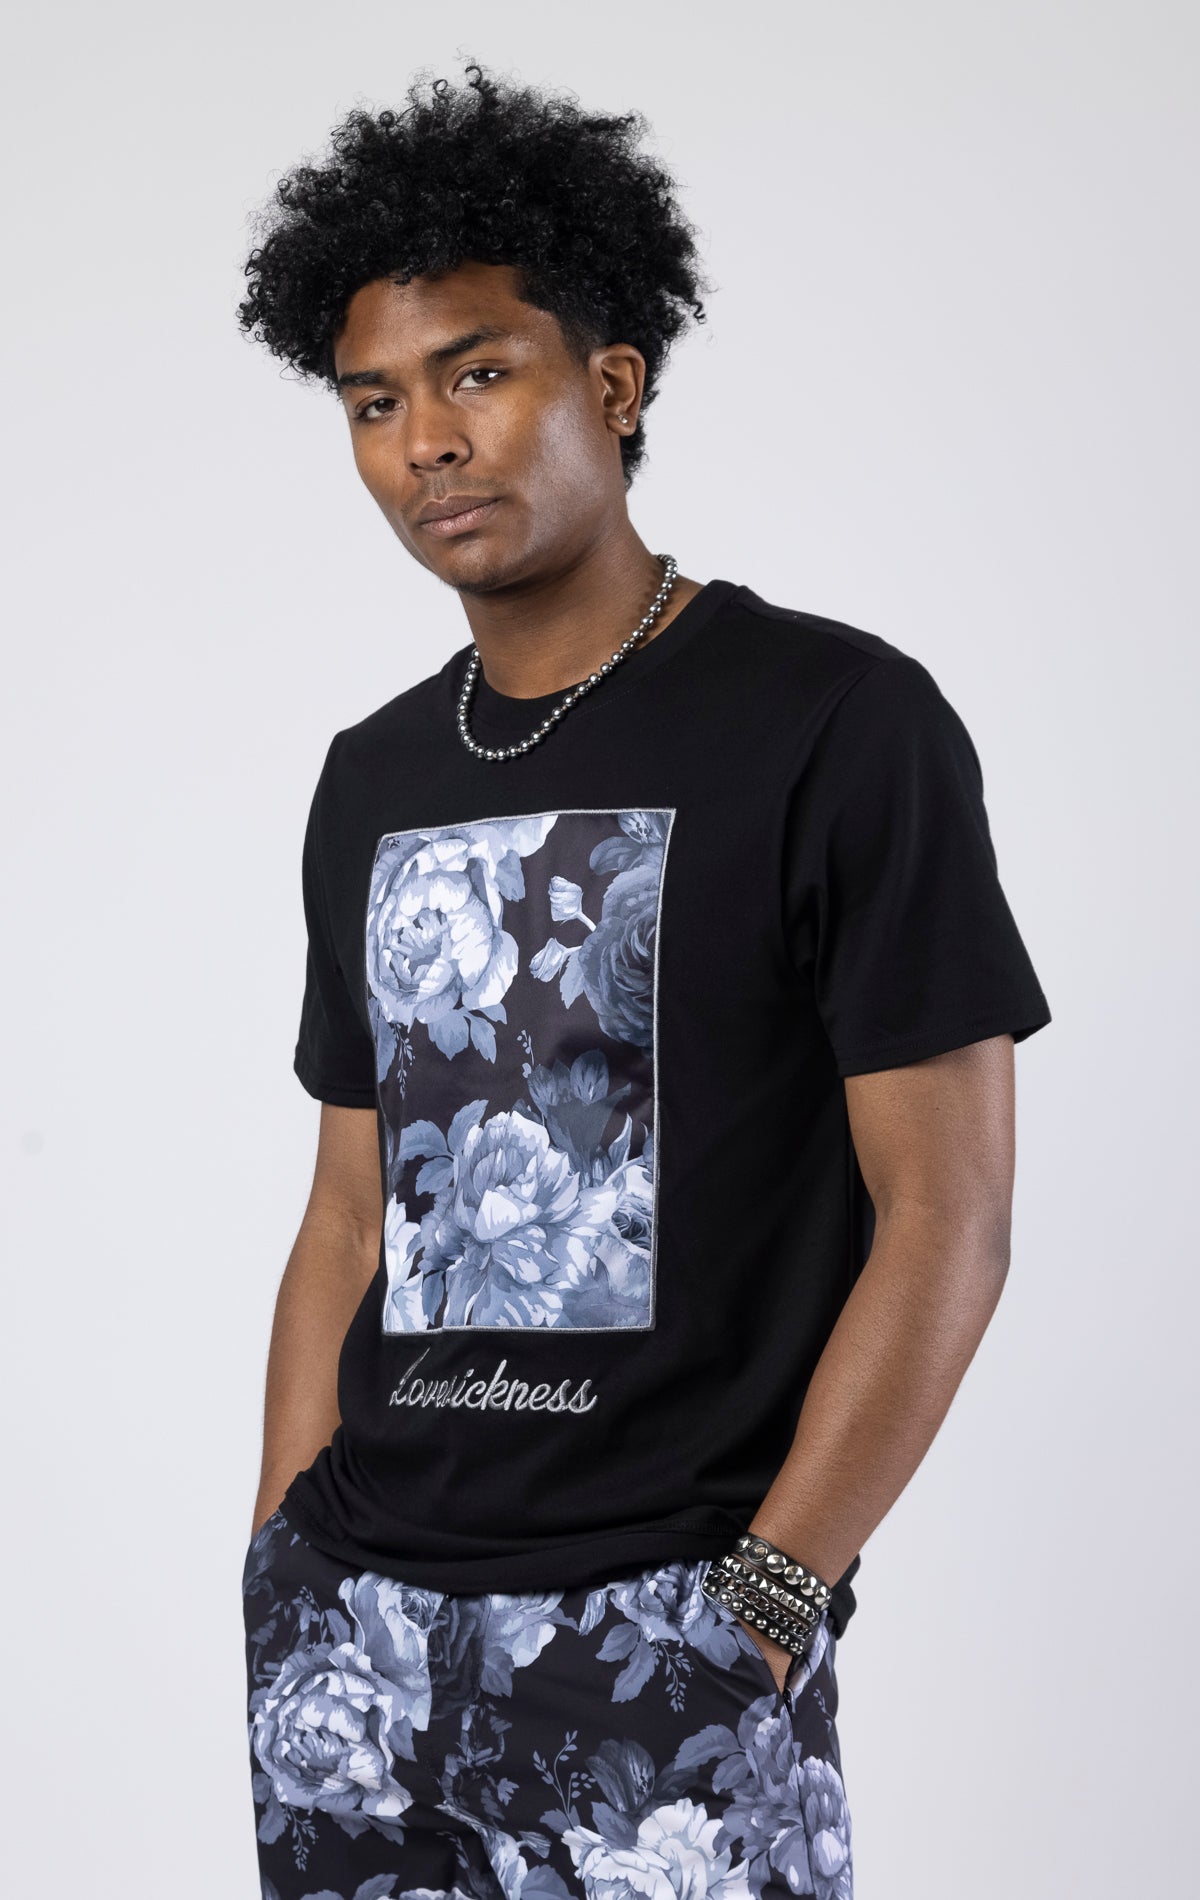 Black A slim-fit vintage rose graphic t-shirt with a crew neck.